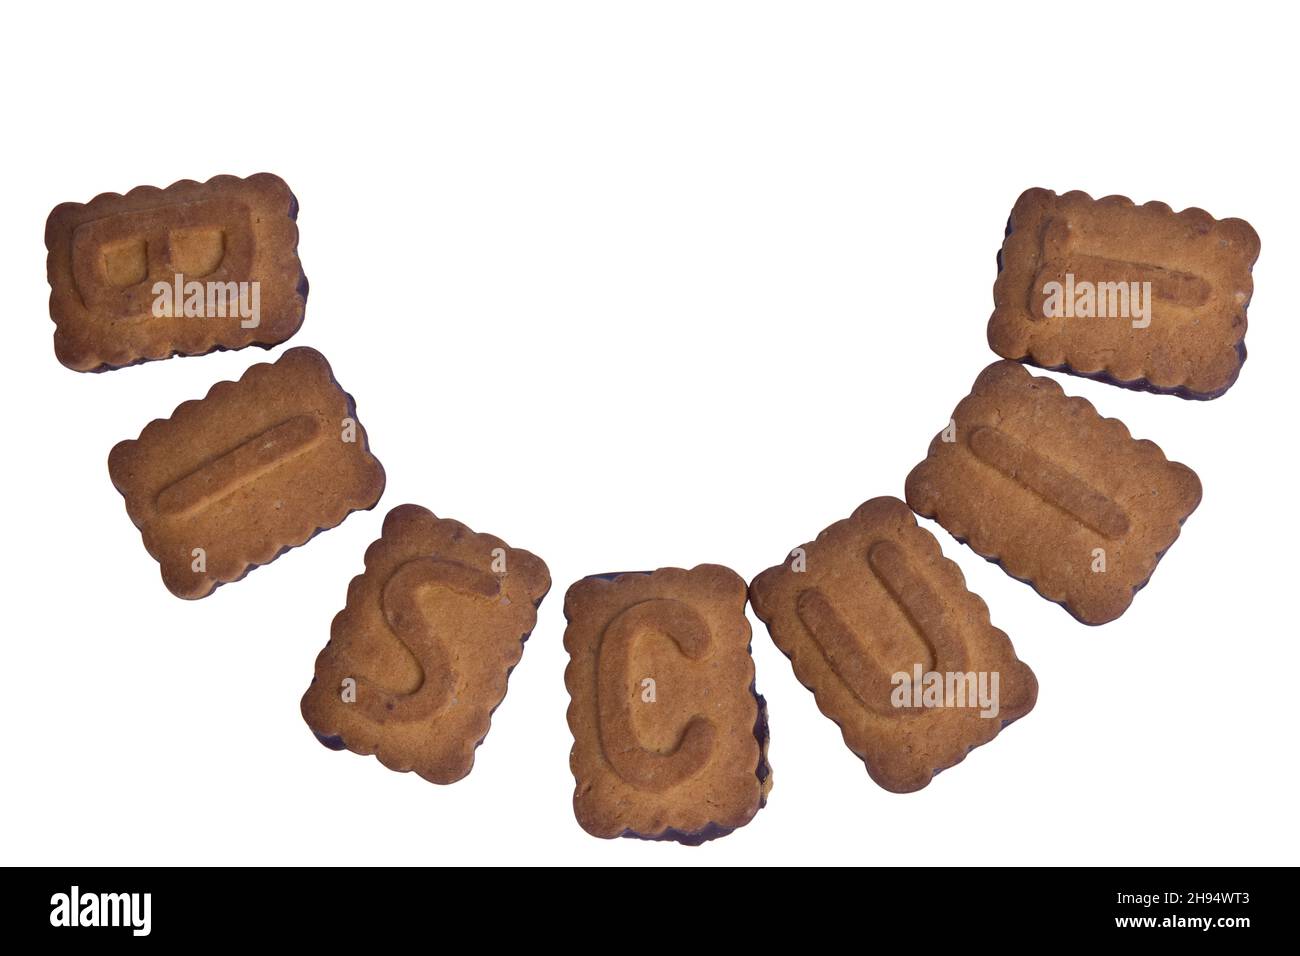 On a white clipping background, the word BISCUIT is laid out in a semicircle of cookies in the center of the frame Stock Photo